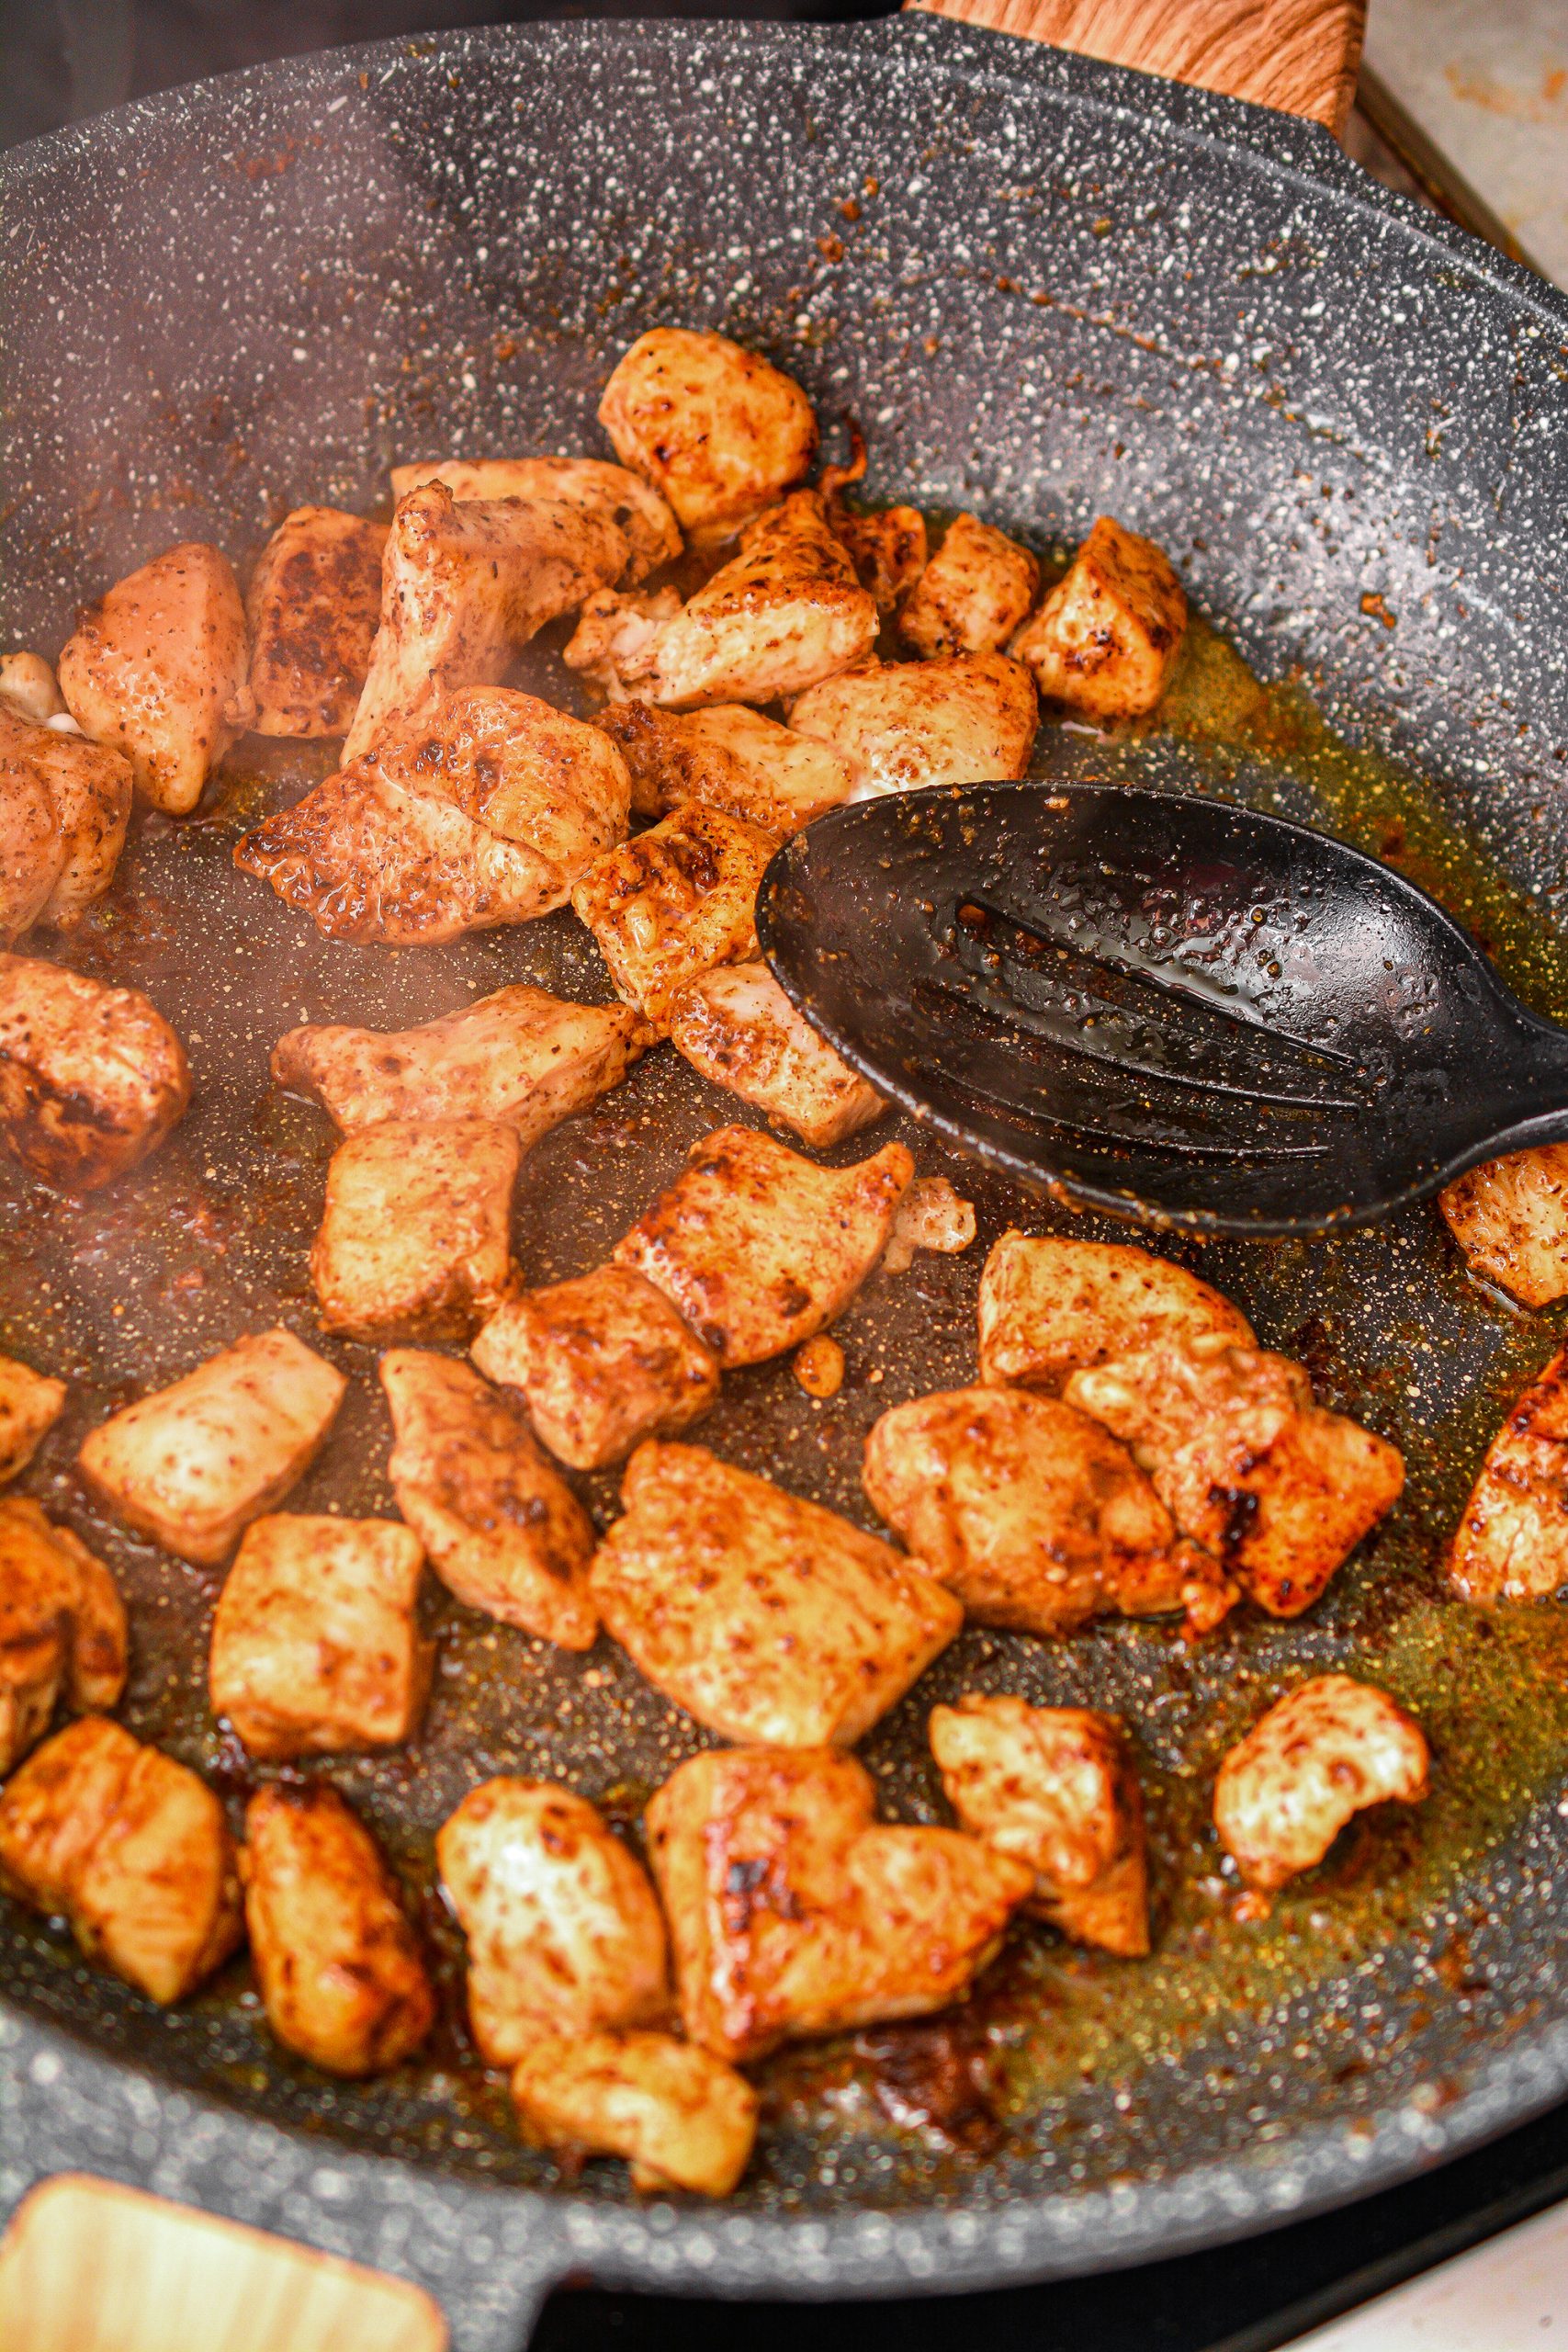 Place 2 Tbsp butter into the skillet and saute the chicken pieces with 1 Tbsp of cajun seasoning